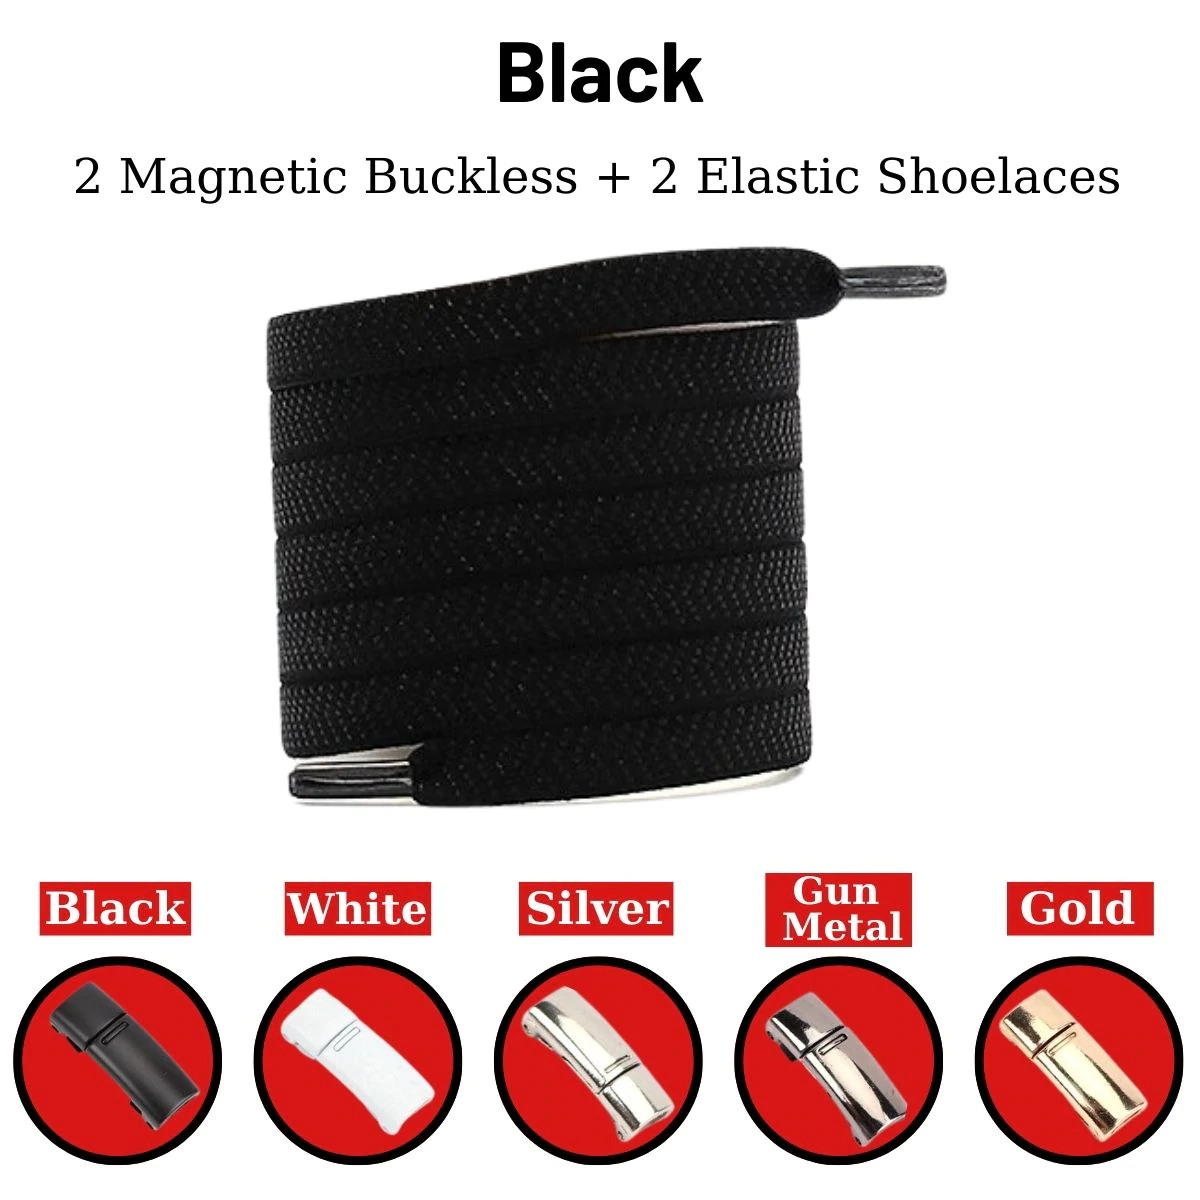 MAGNETIC NO-TIE SHOELACES (60% OFF TODAY!)